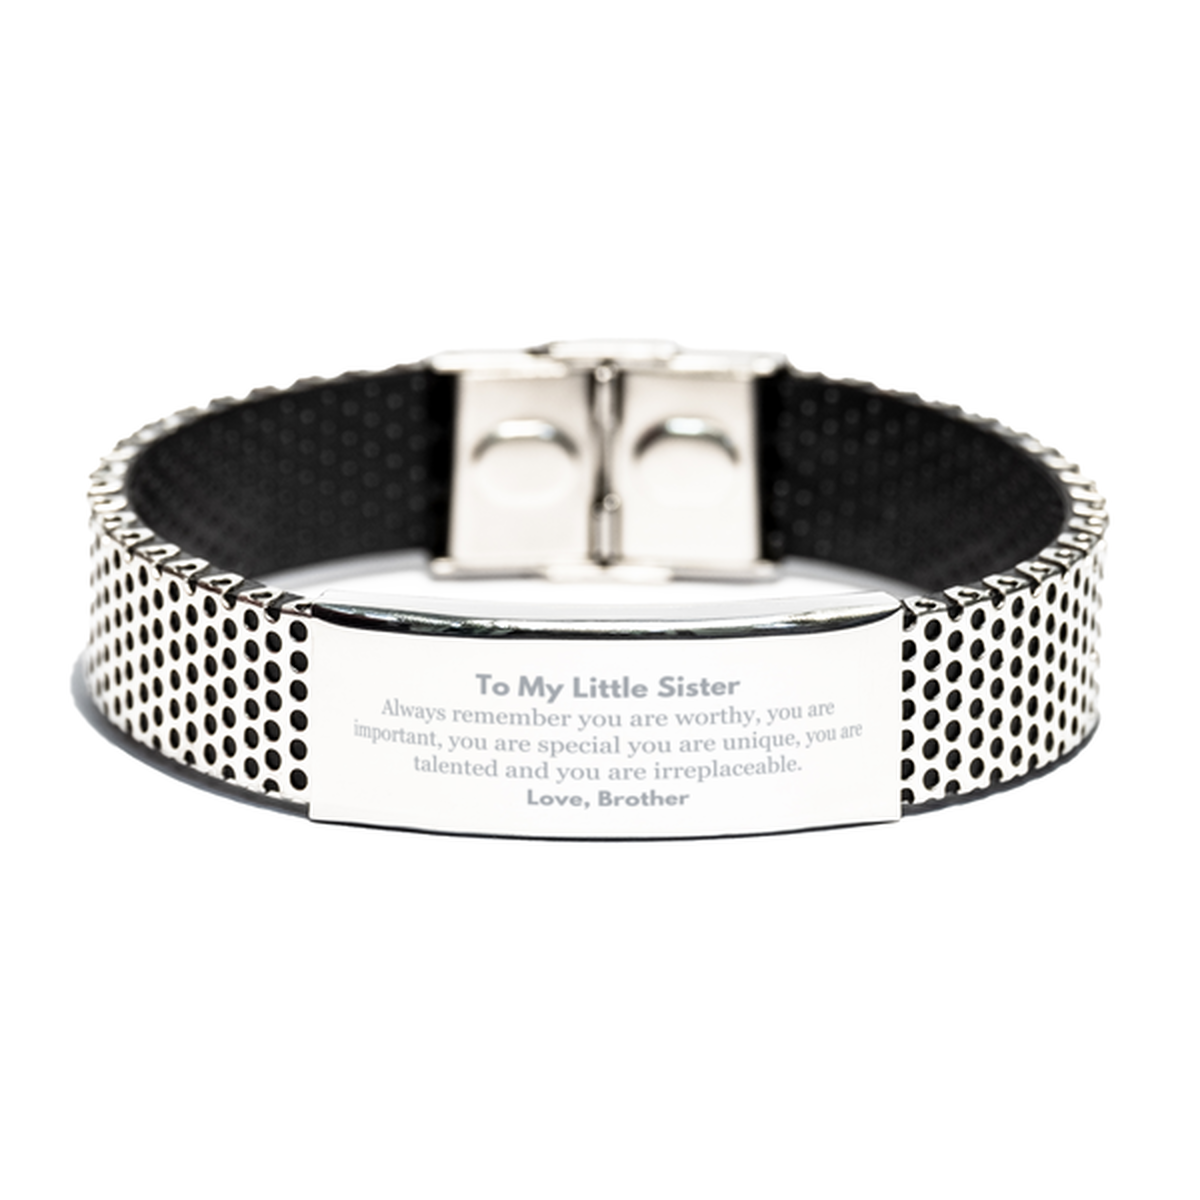 Little Sister Birthday Gifts from Brother, Inspirational Stainless Steel Bracelet for Little Sister Christmas Graduation Gifts for Little Sister Always remember you are worthy, you are important. Love, Brother